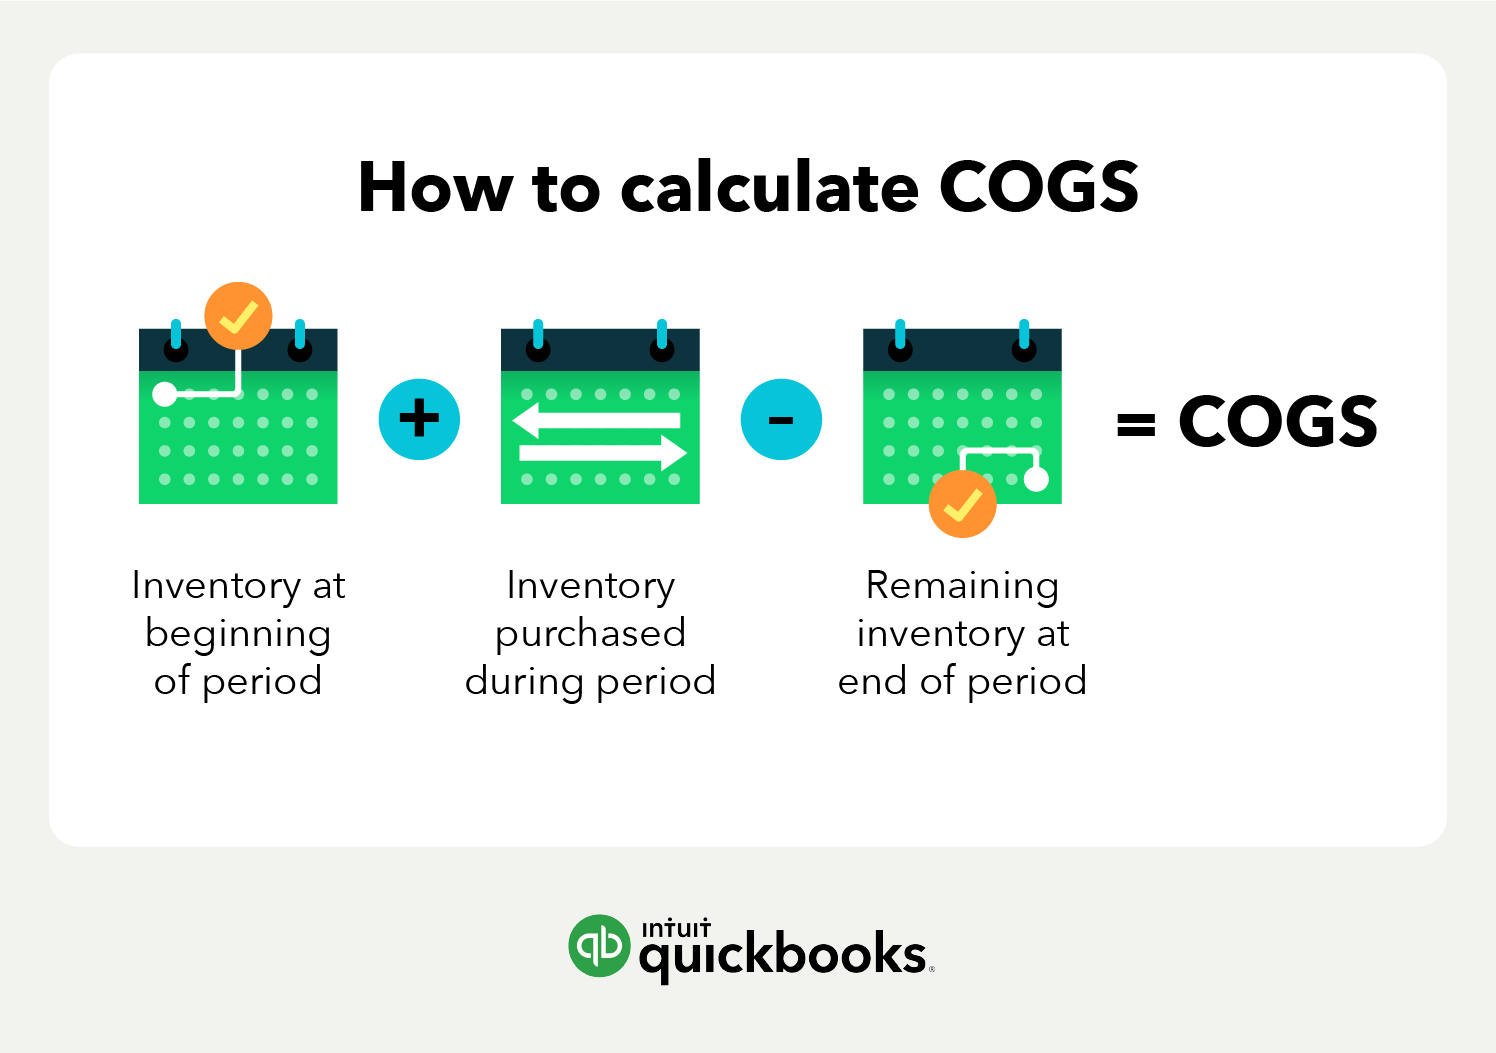 COGS formula with calendar icons showing the beginning of the period, duration of the period, and end of the period, the inputs into the calculation for cost of good sold.